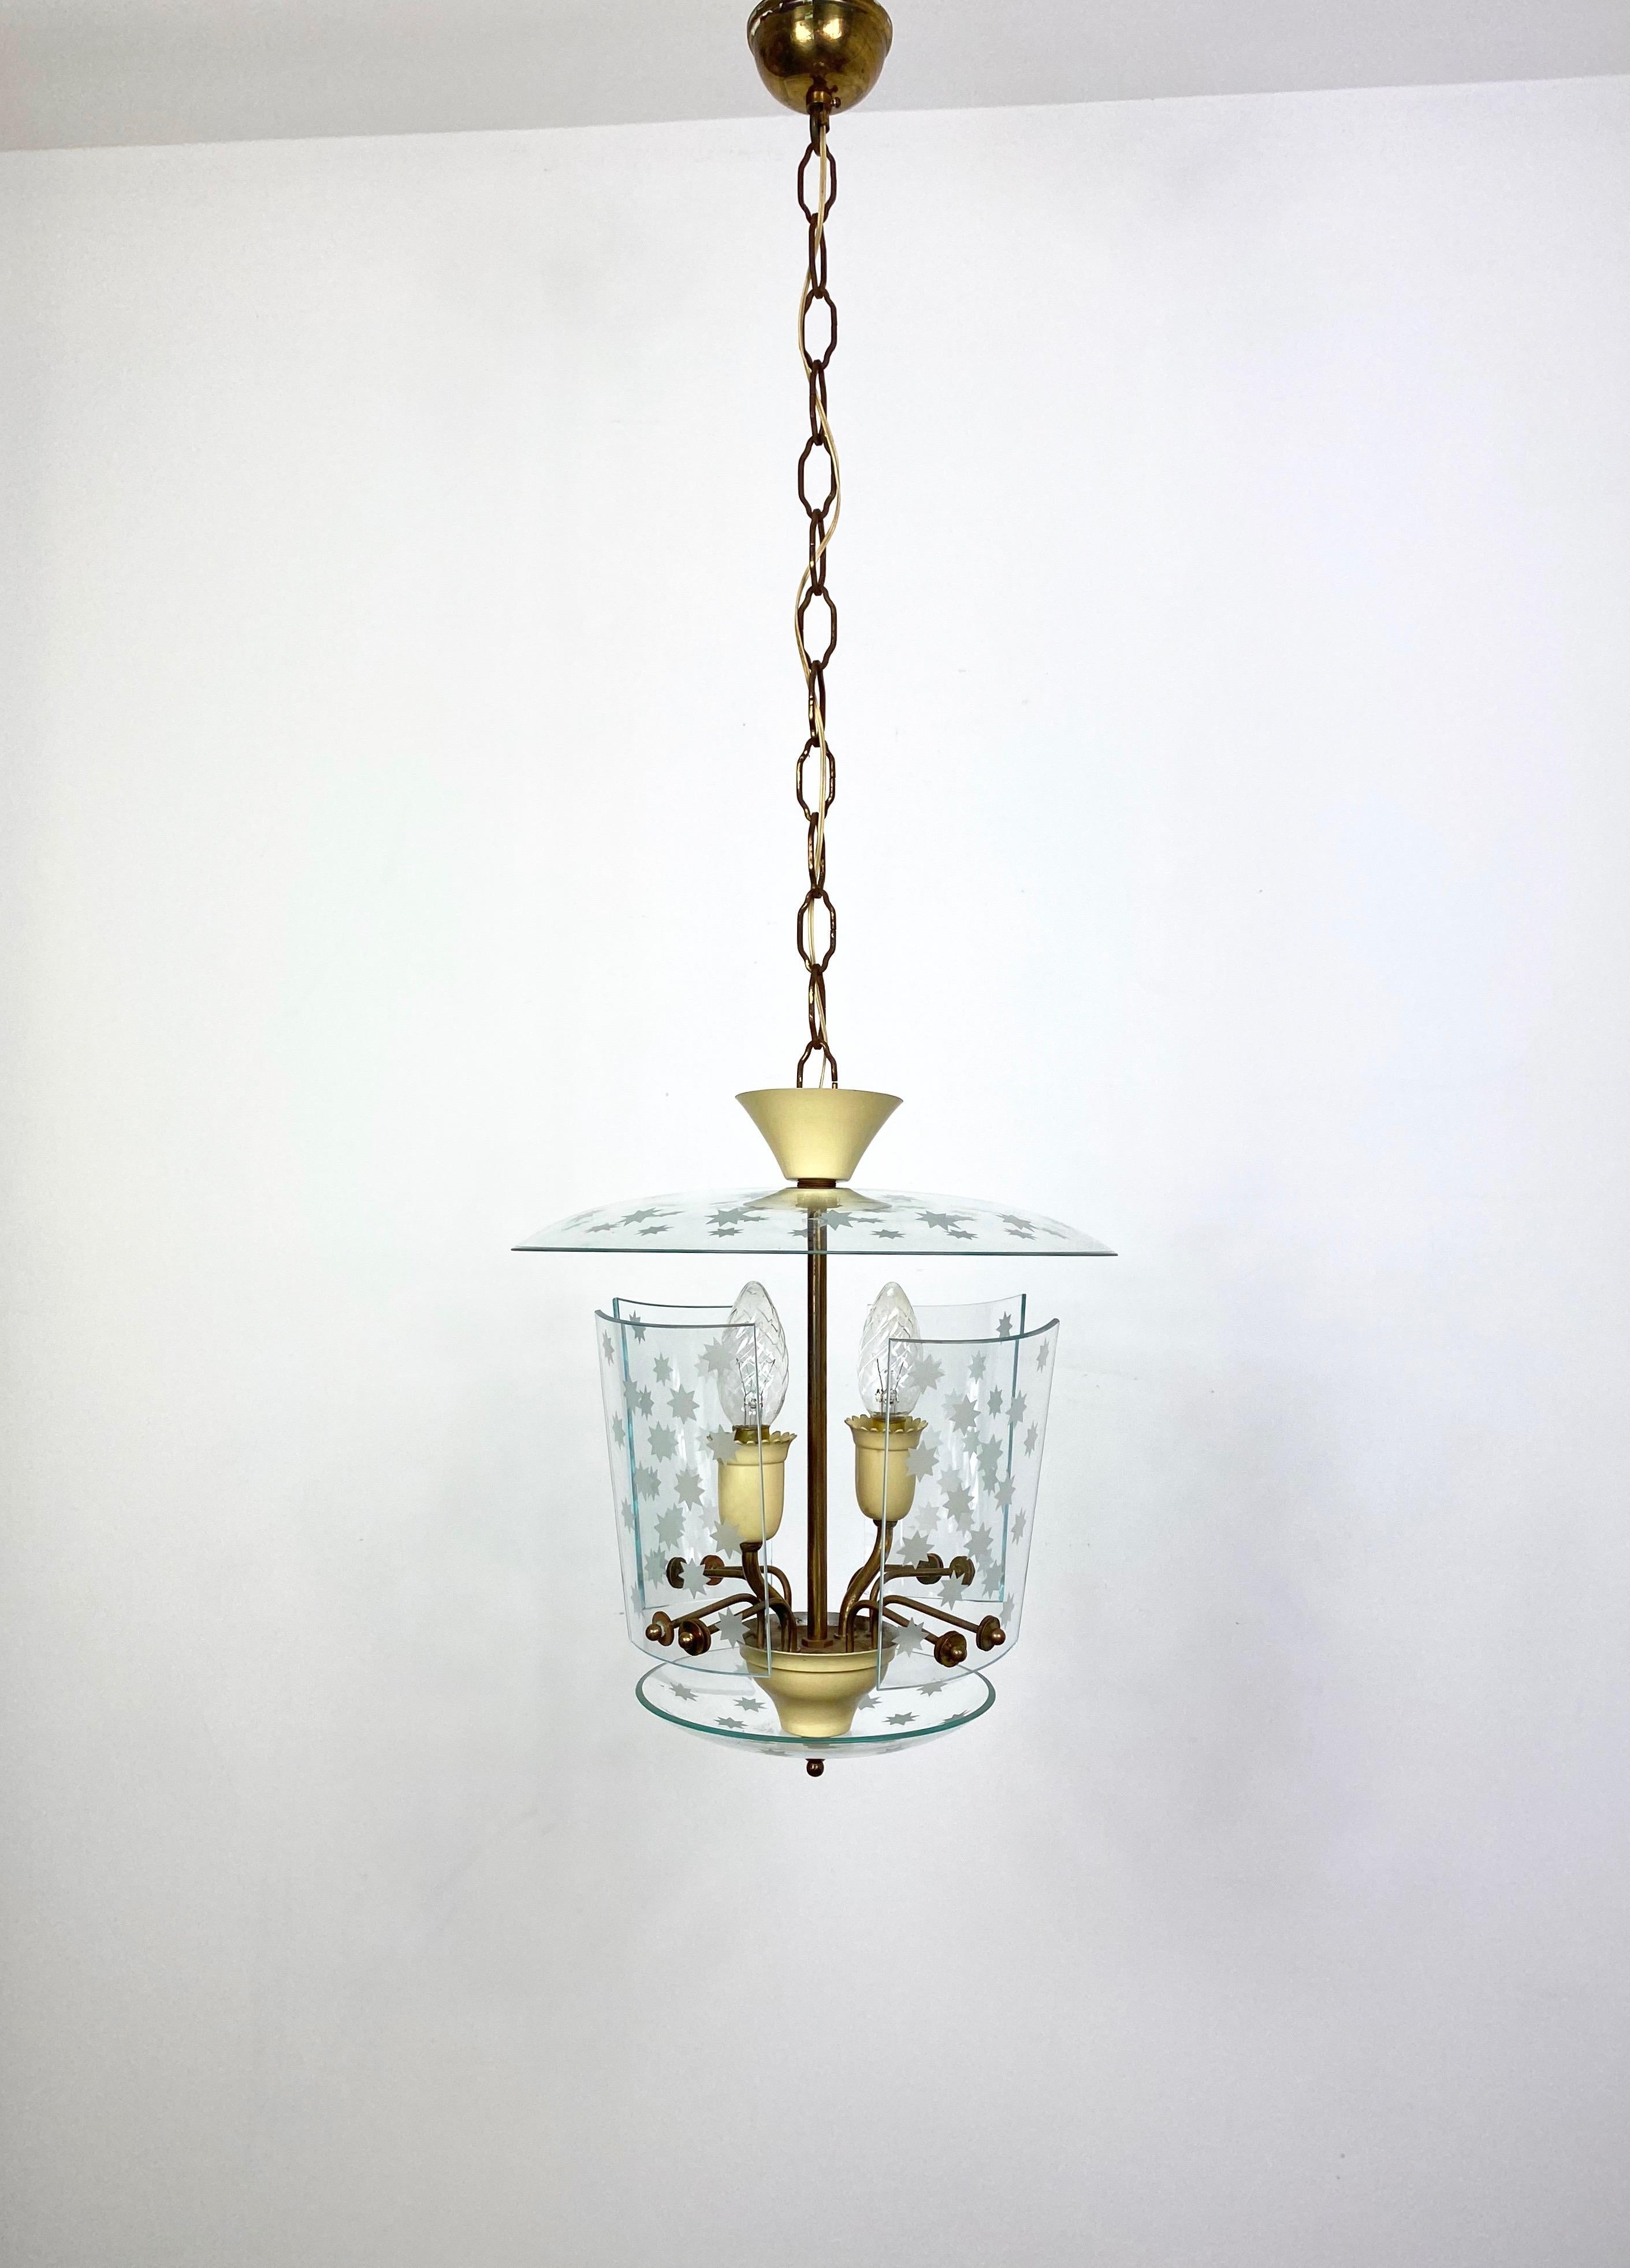 Chandelier lantern by the Italian eco designer Pietro Chiesa for Fontana Arte, circa 1950. Two-light with a glass structure embedded with incised stars on the surfaces and brass details.

Dimensions:
With pendant 90 height x 30 diameter